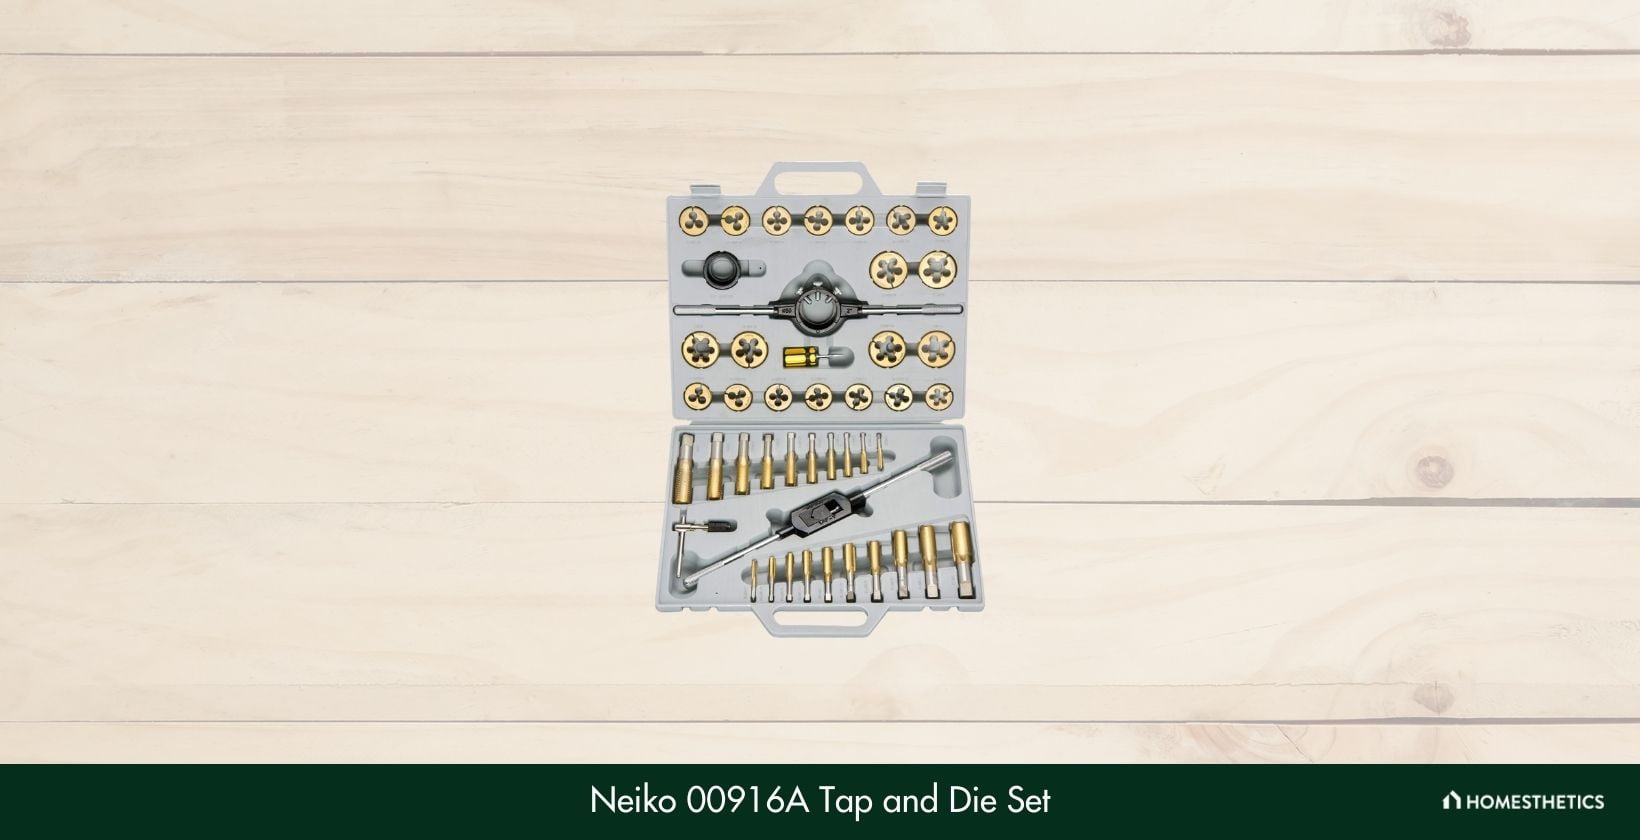 Neiko 00916A Tap and Die Set